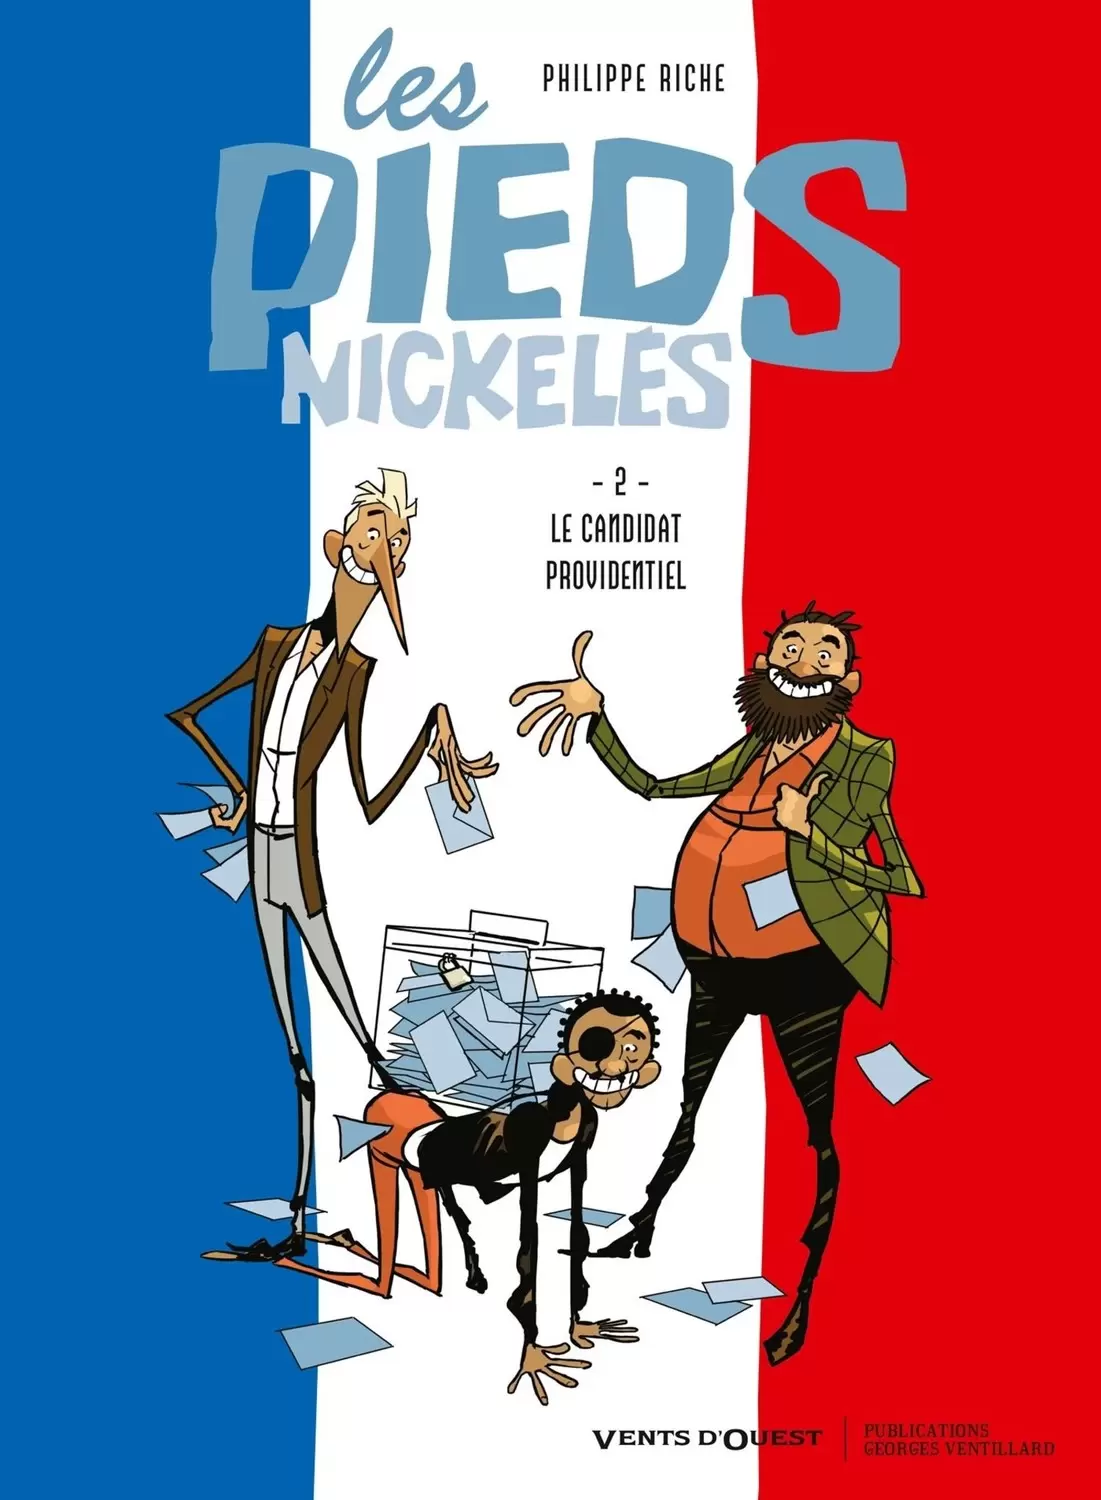 Les Pieds Nickelés - France Loisirs - Le candidat providentiel